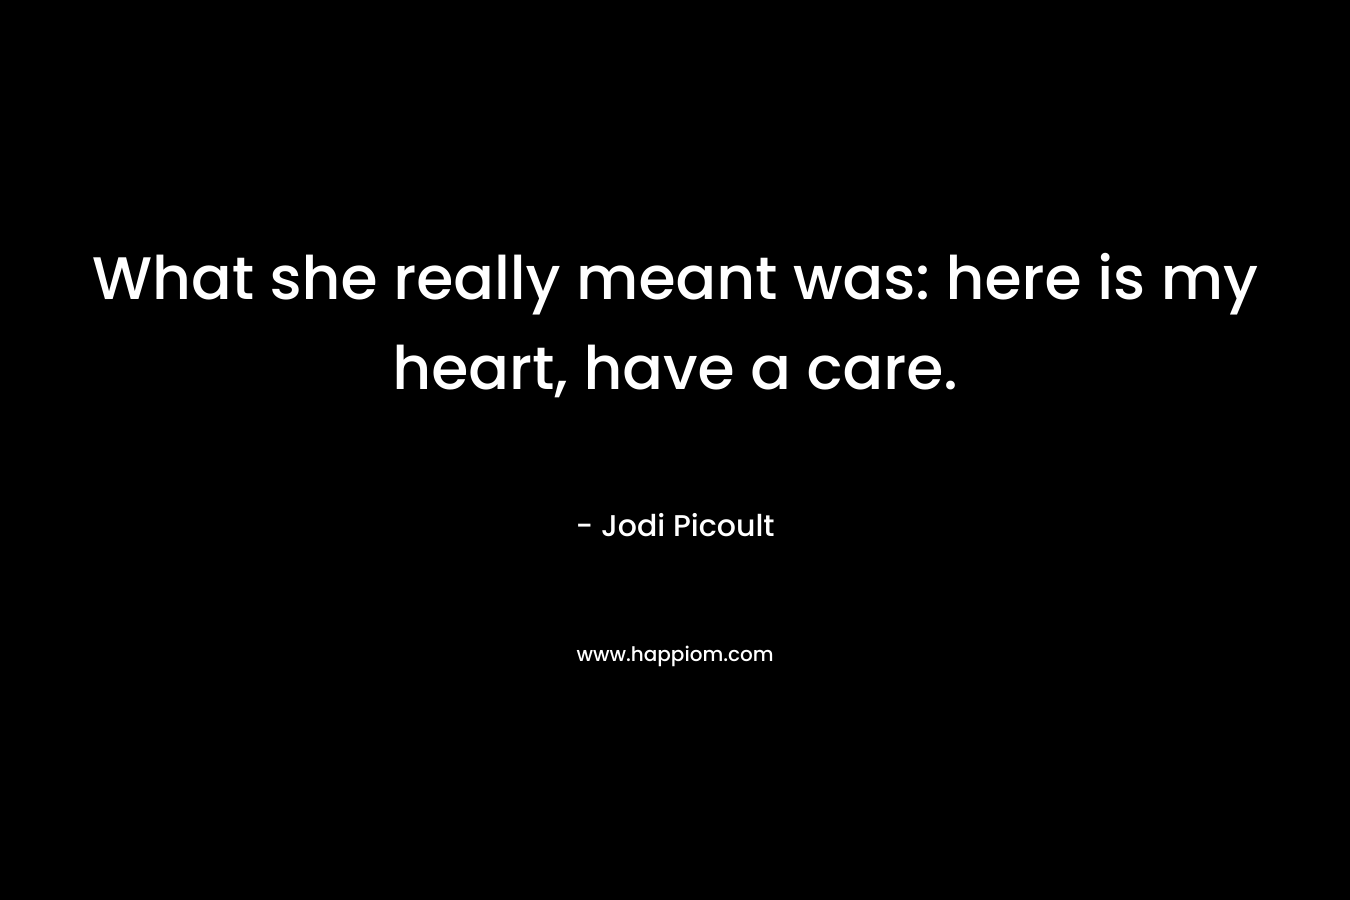 What she really meant was: here is my heart, have a care.